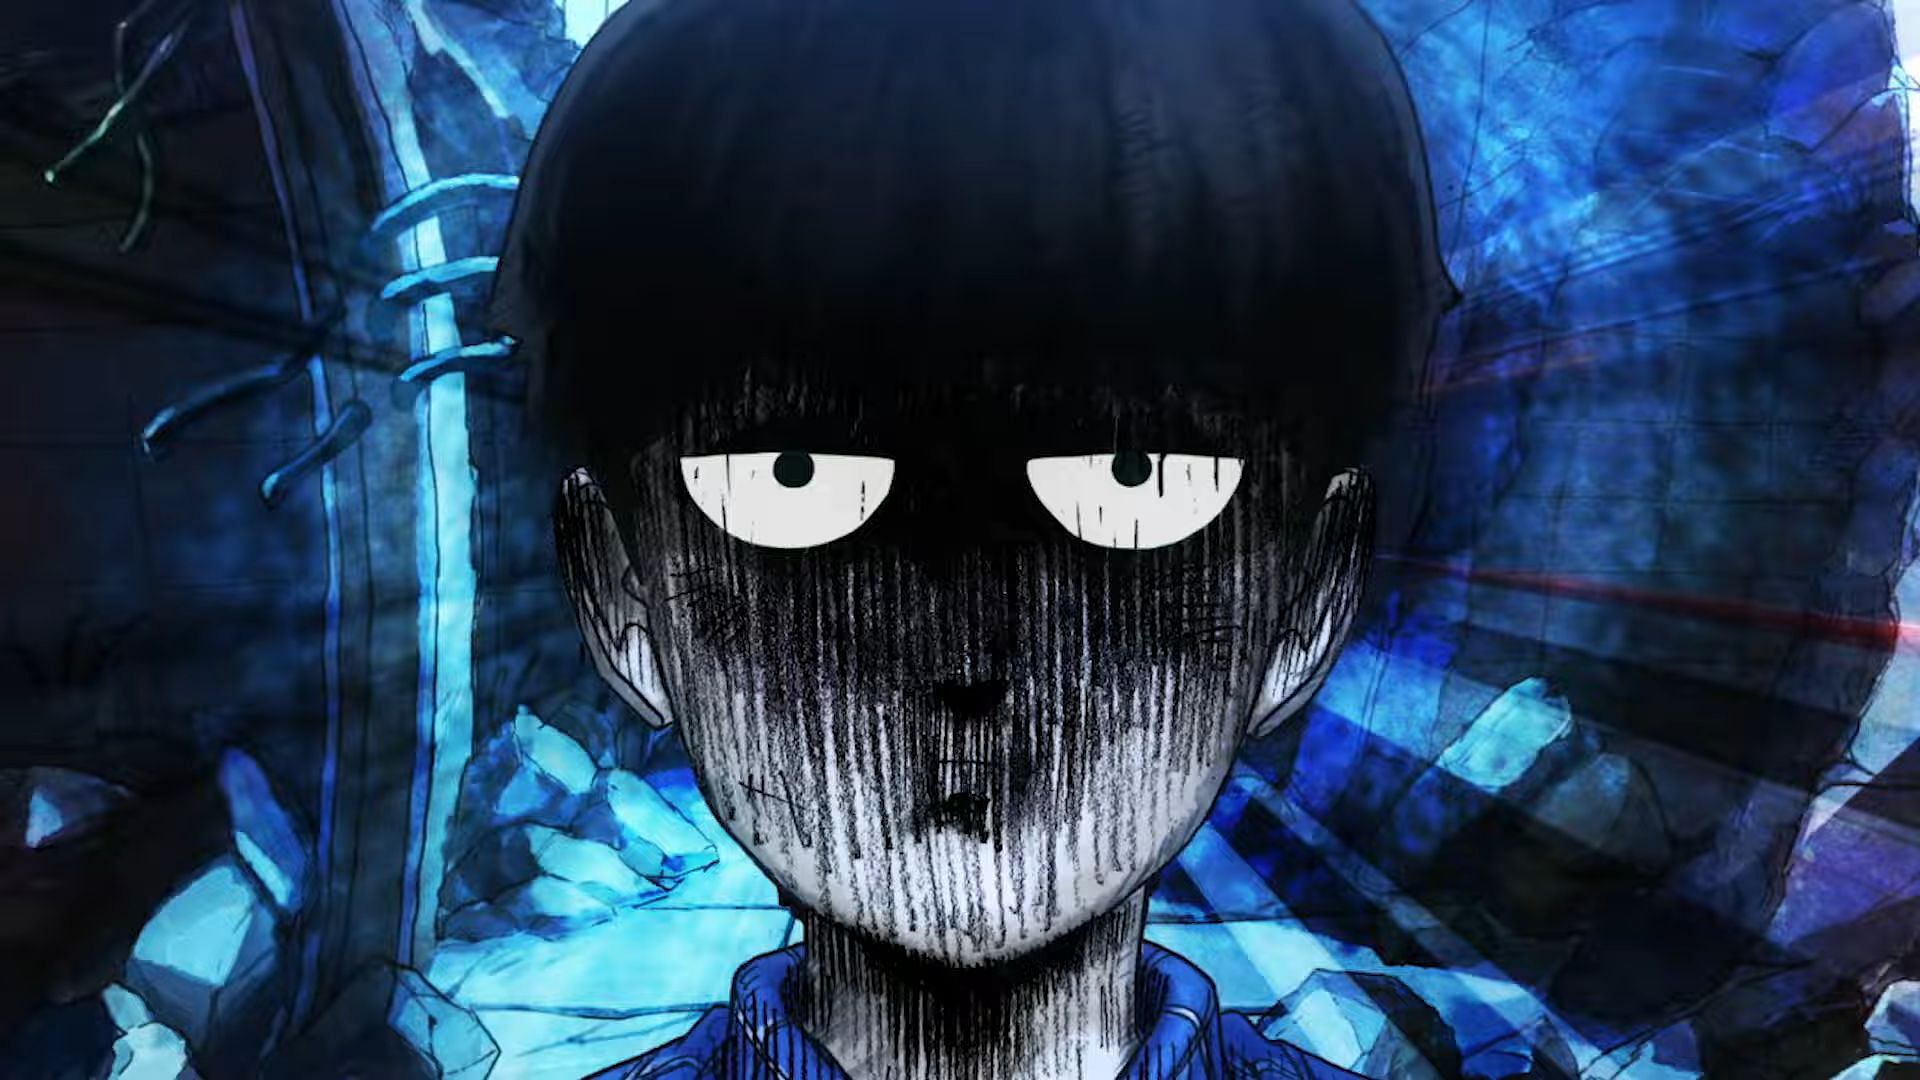 Mob Psycho 100 Season 3 Shares Episode Count